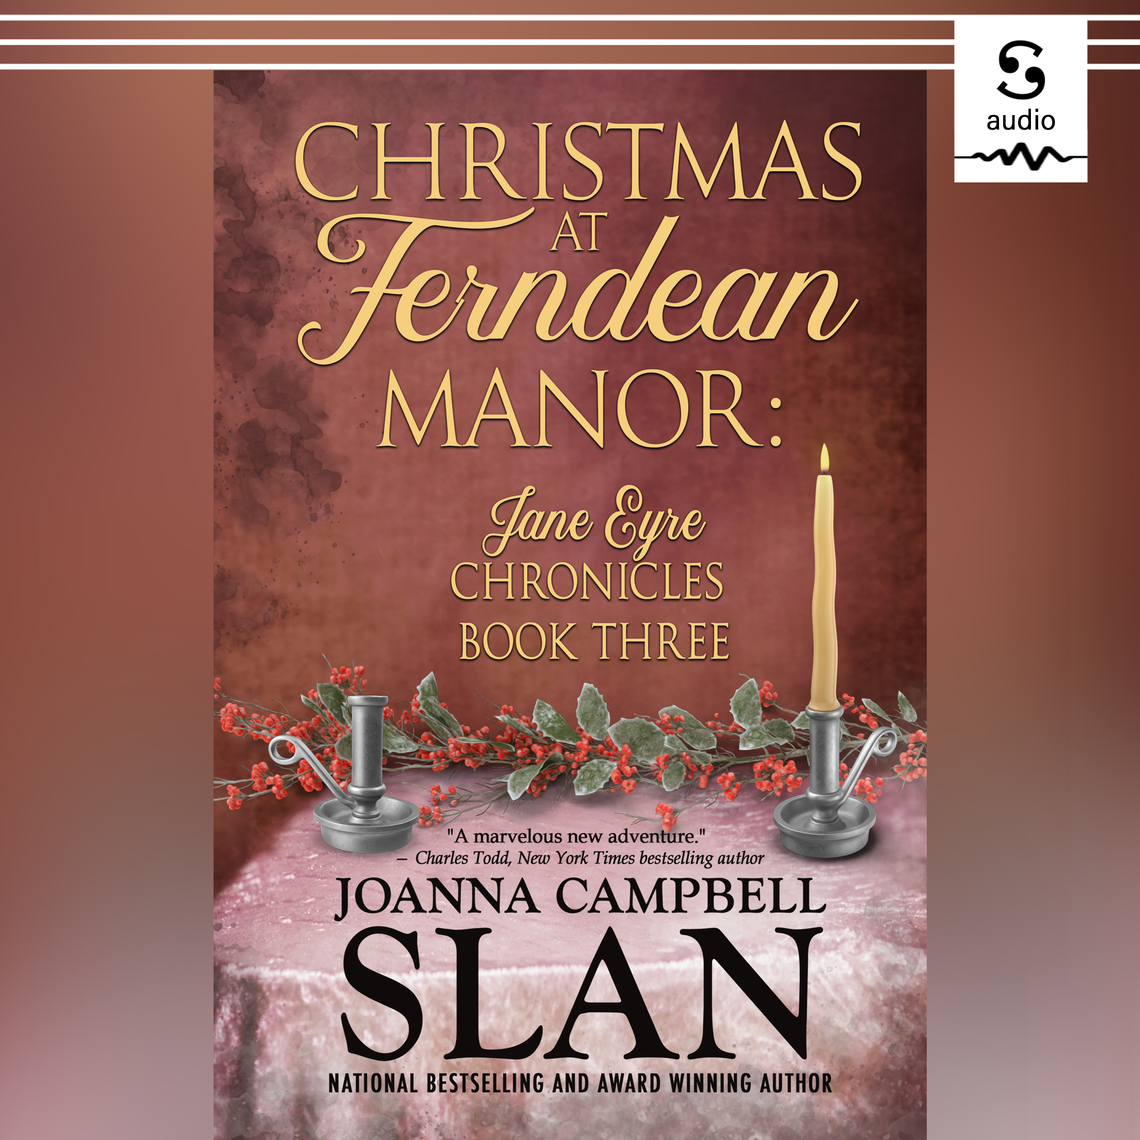 Christmas at Ferndean Manor by Joanna Campbell Slan picture